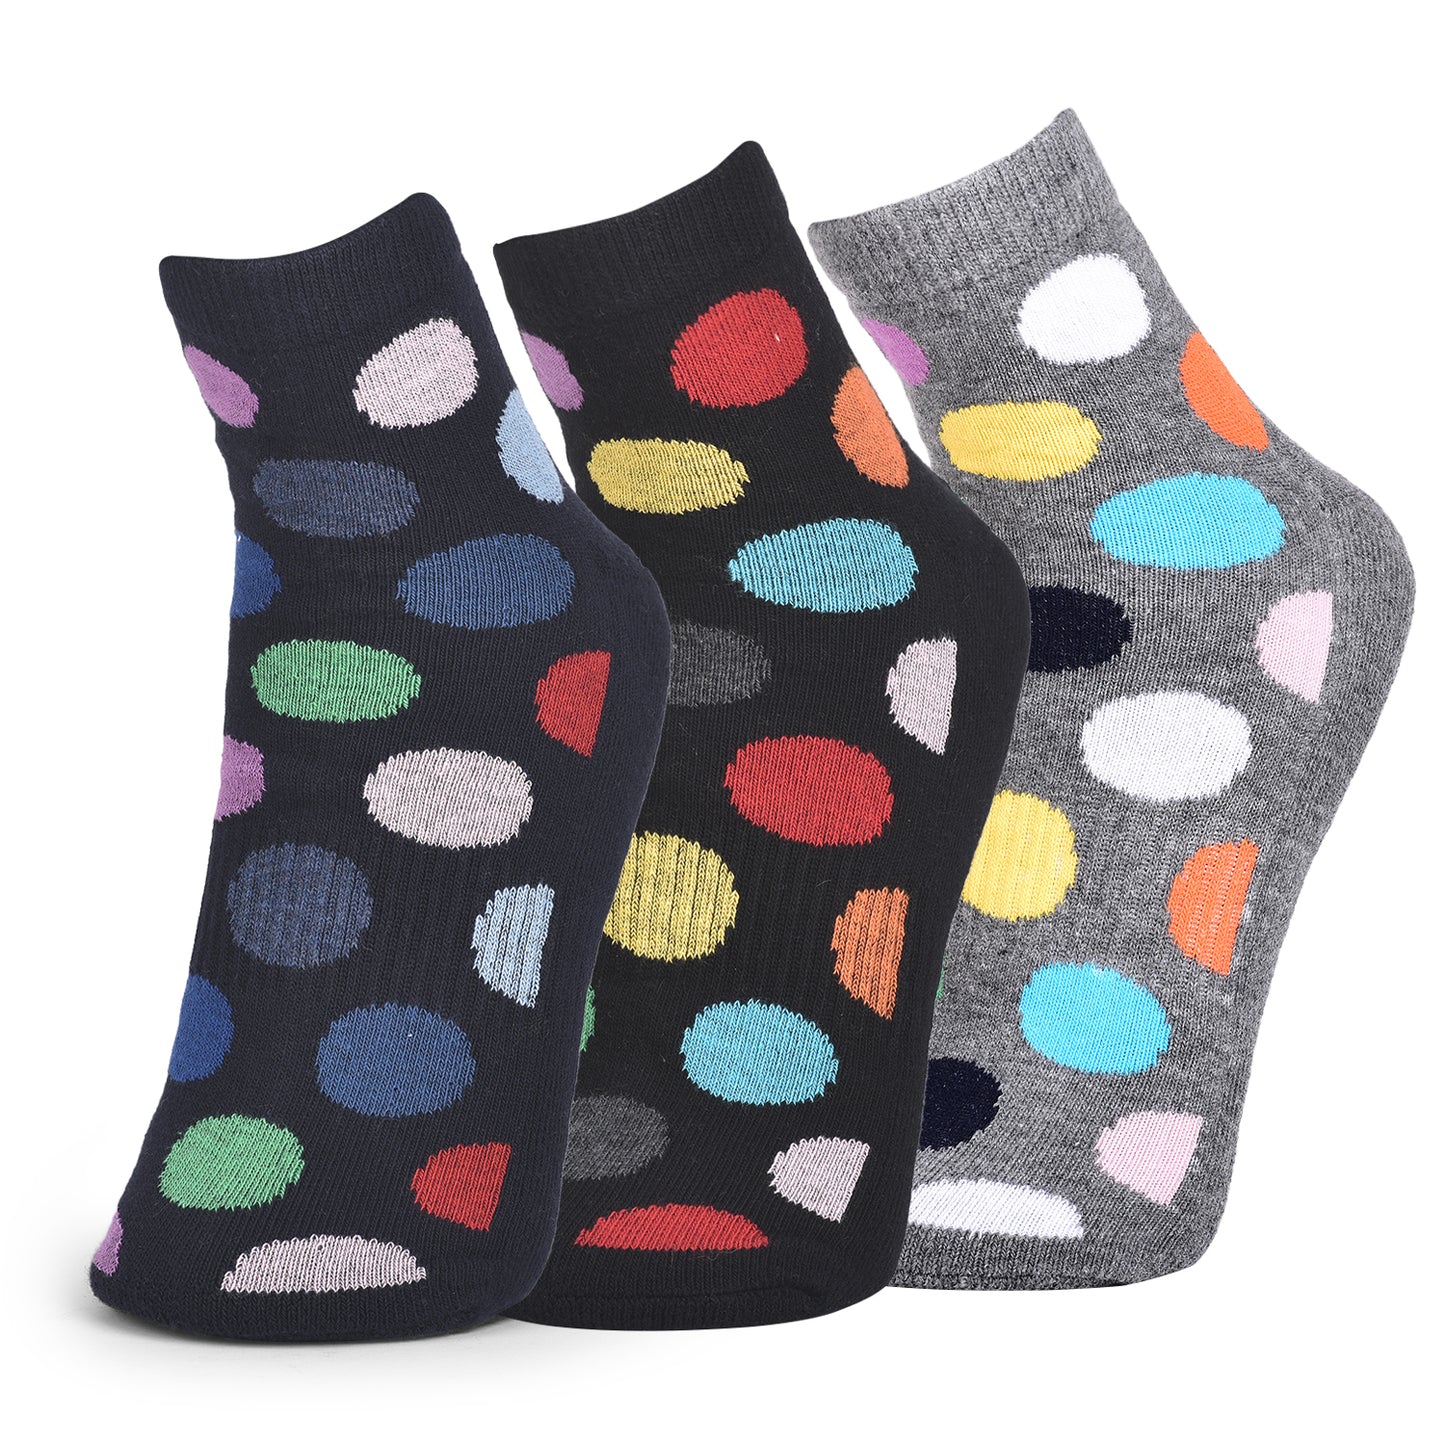 Unisex Ankle Cotton Socks Navy, Grey And Black Polka Dots Design - Pack of 3